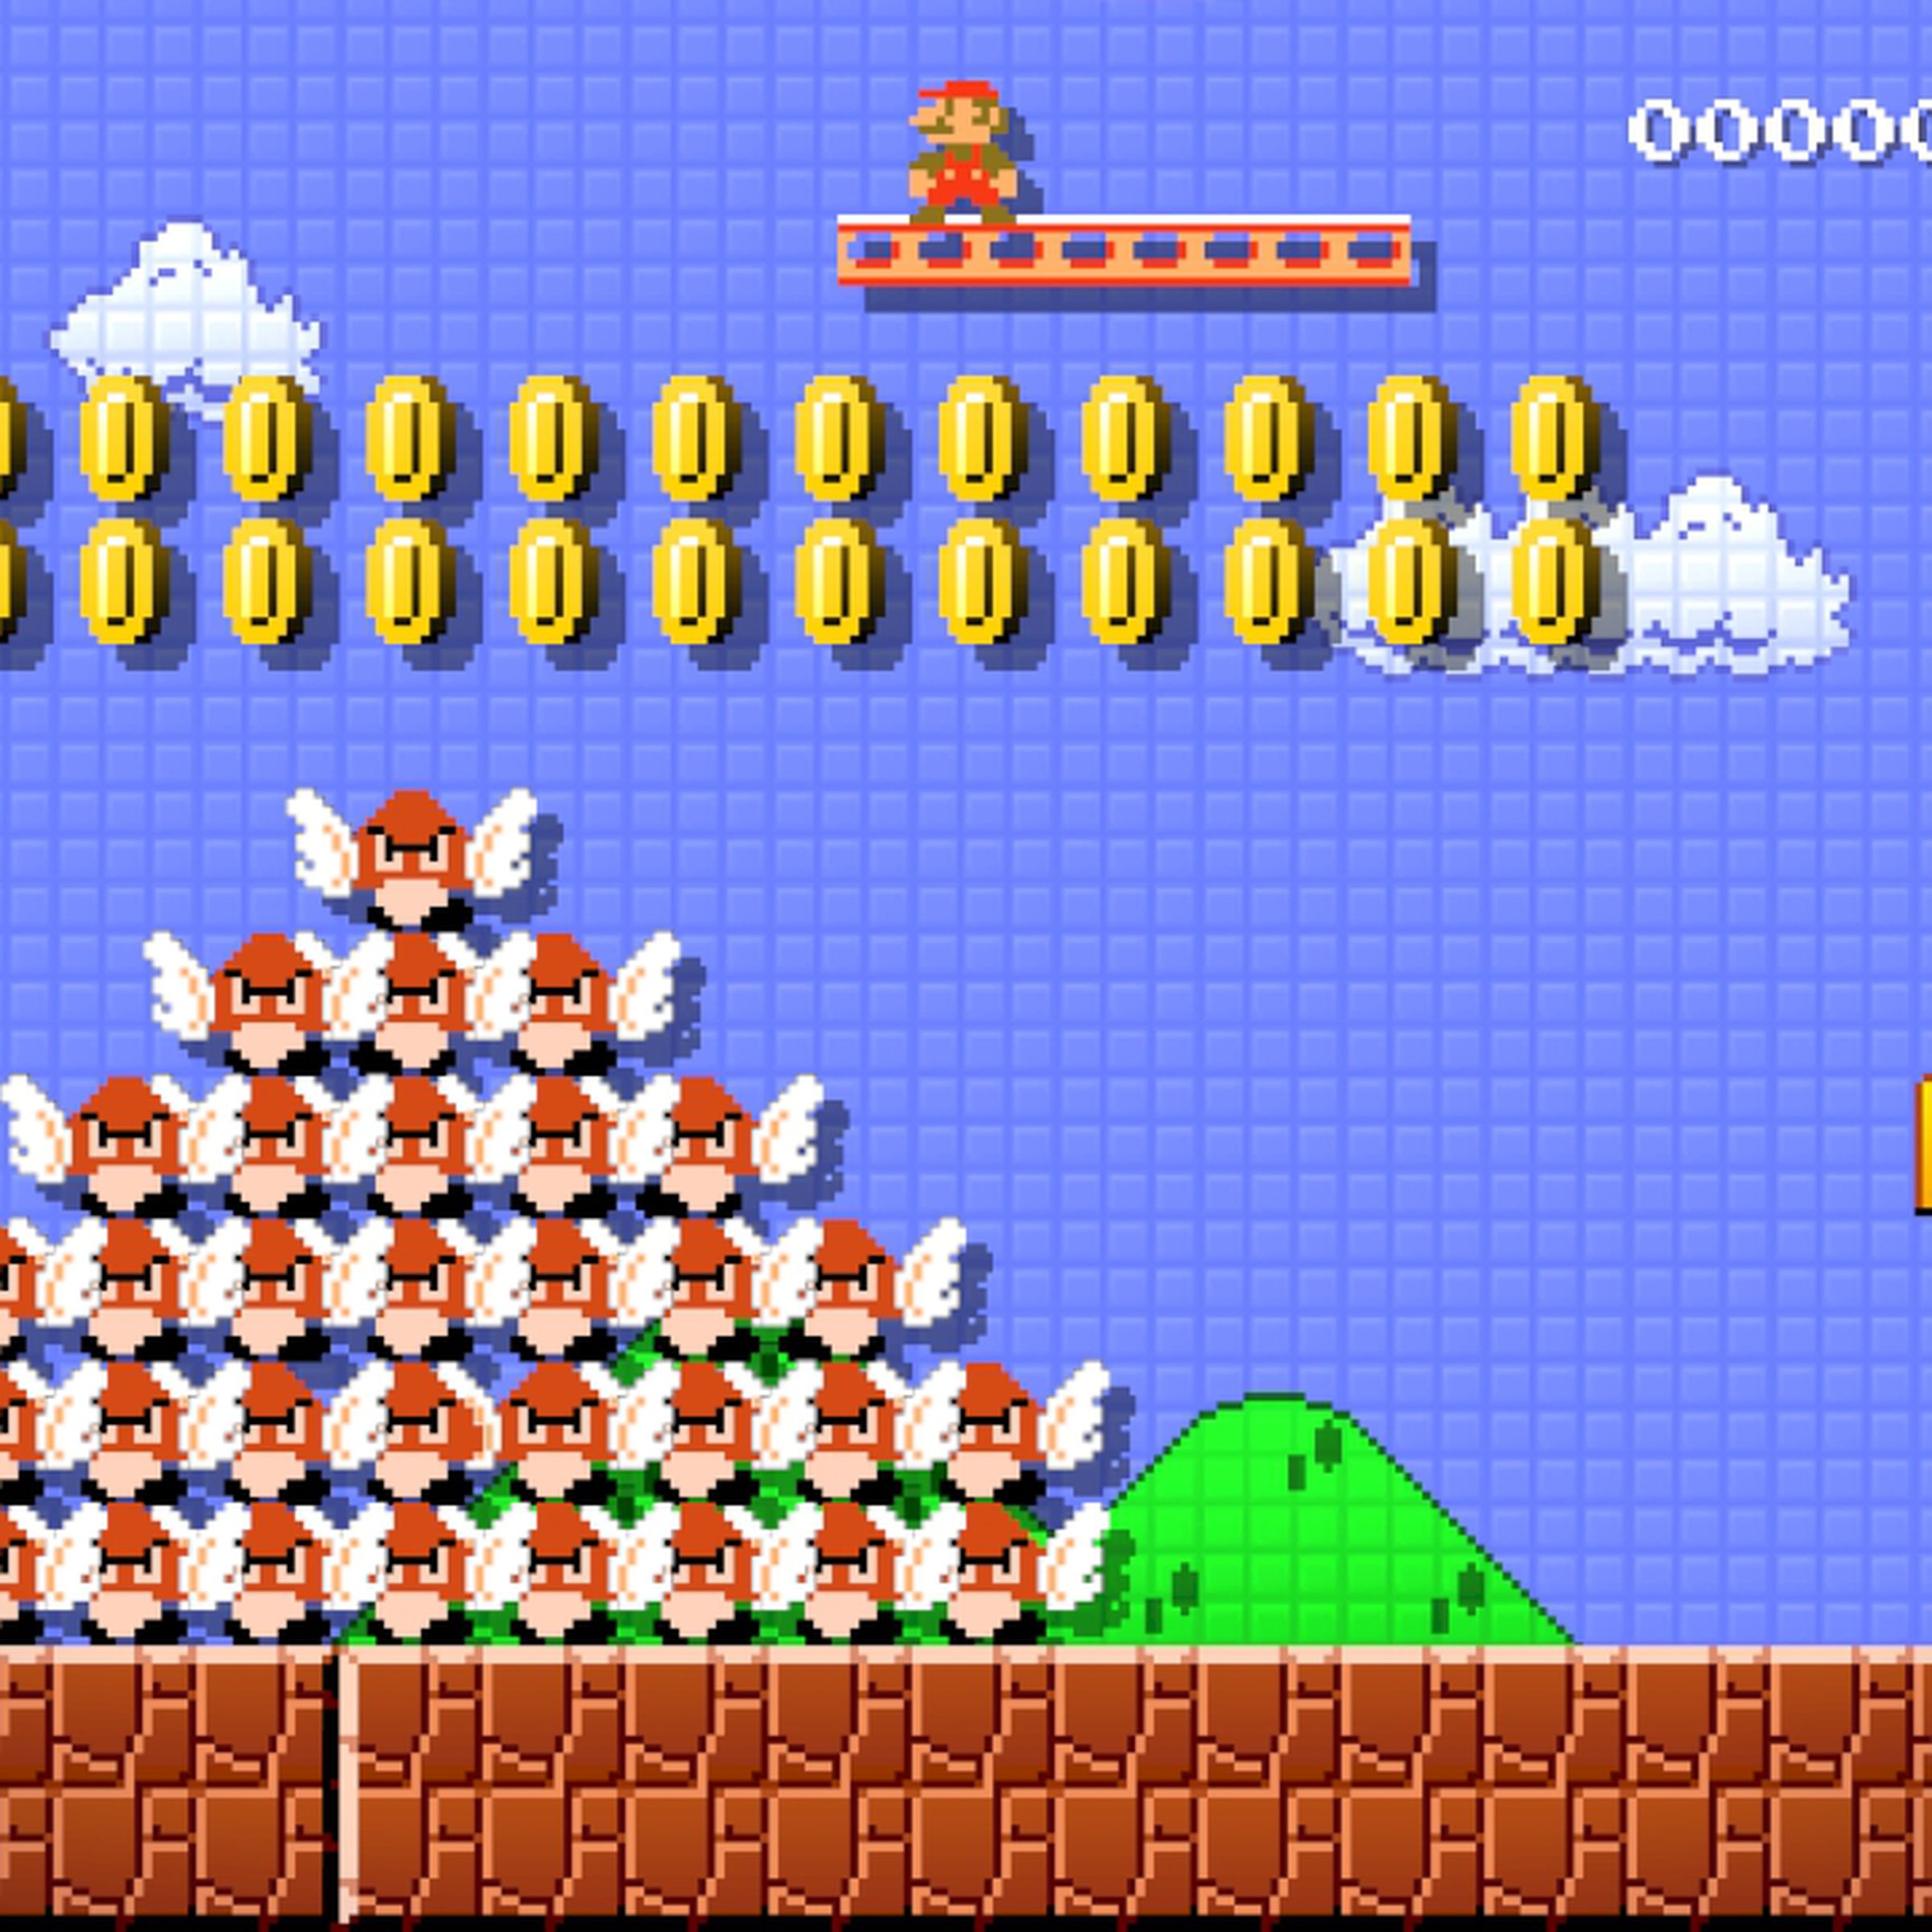 A screenshot from the video game Super Mario Maker for the Nintendo Wii U.